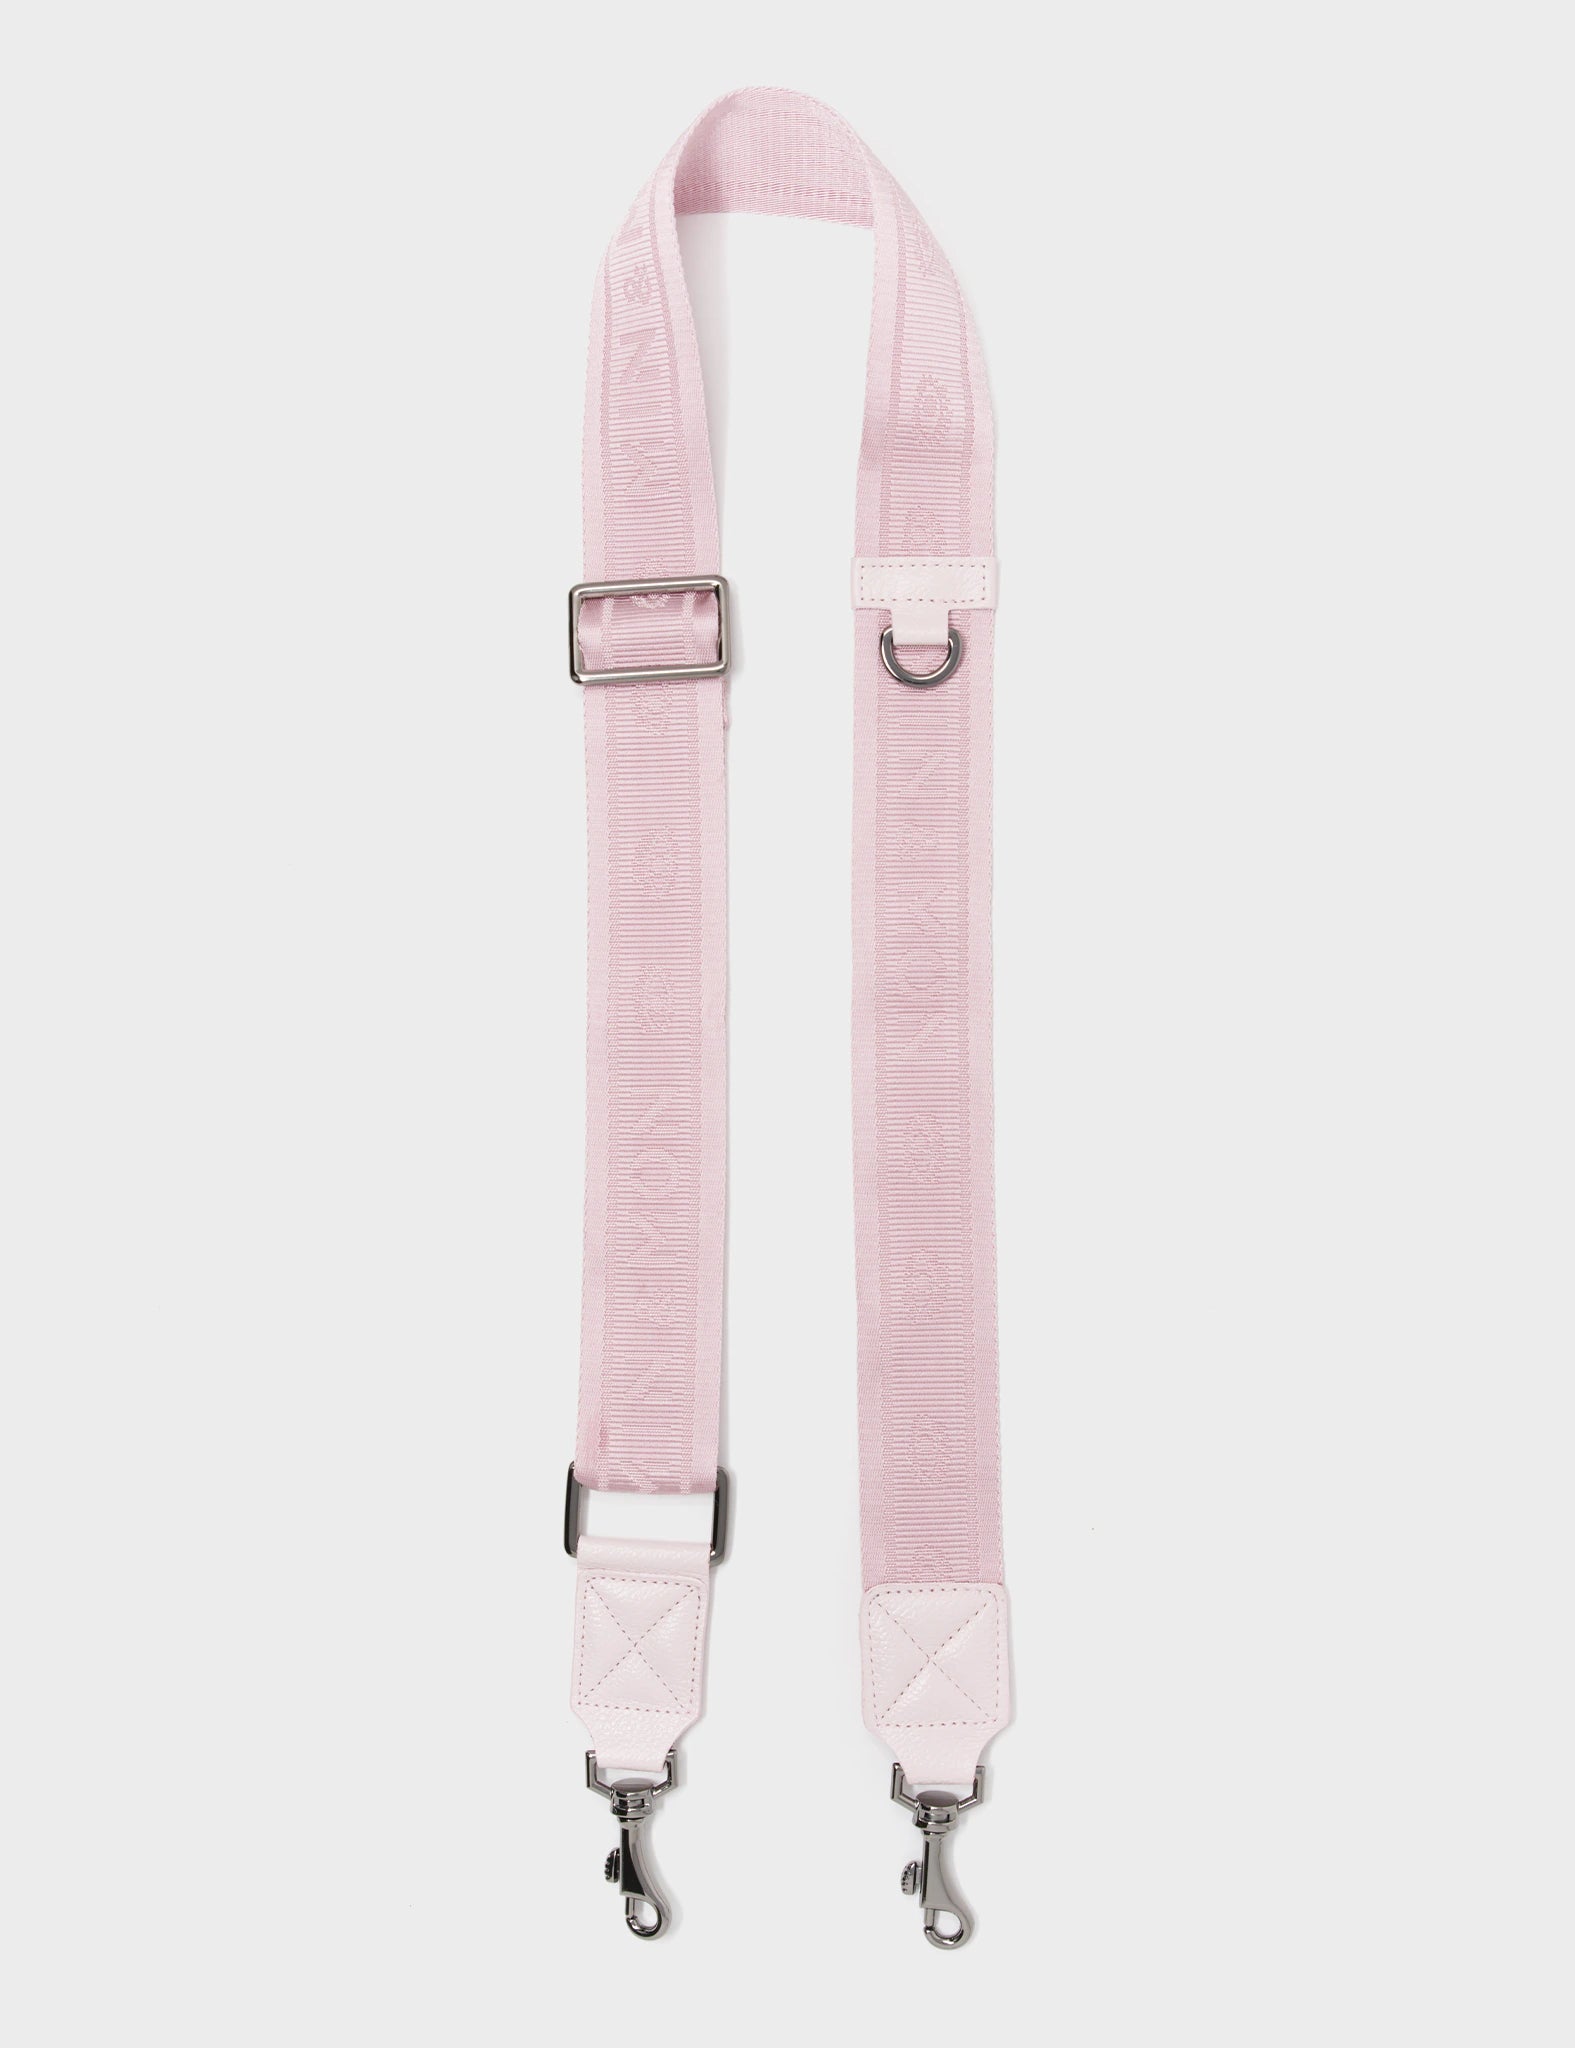 Detachable Crossbody Powder Pink Leather and Nylon Strap Eyes Design - Lenght